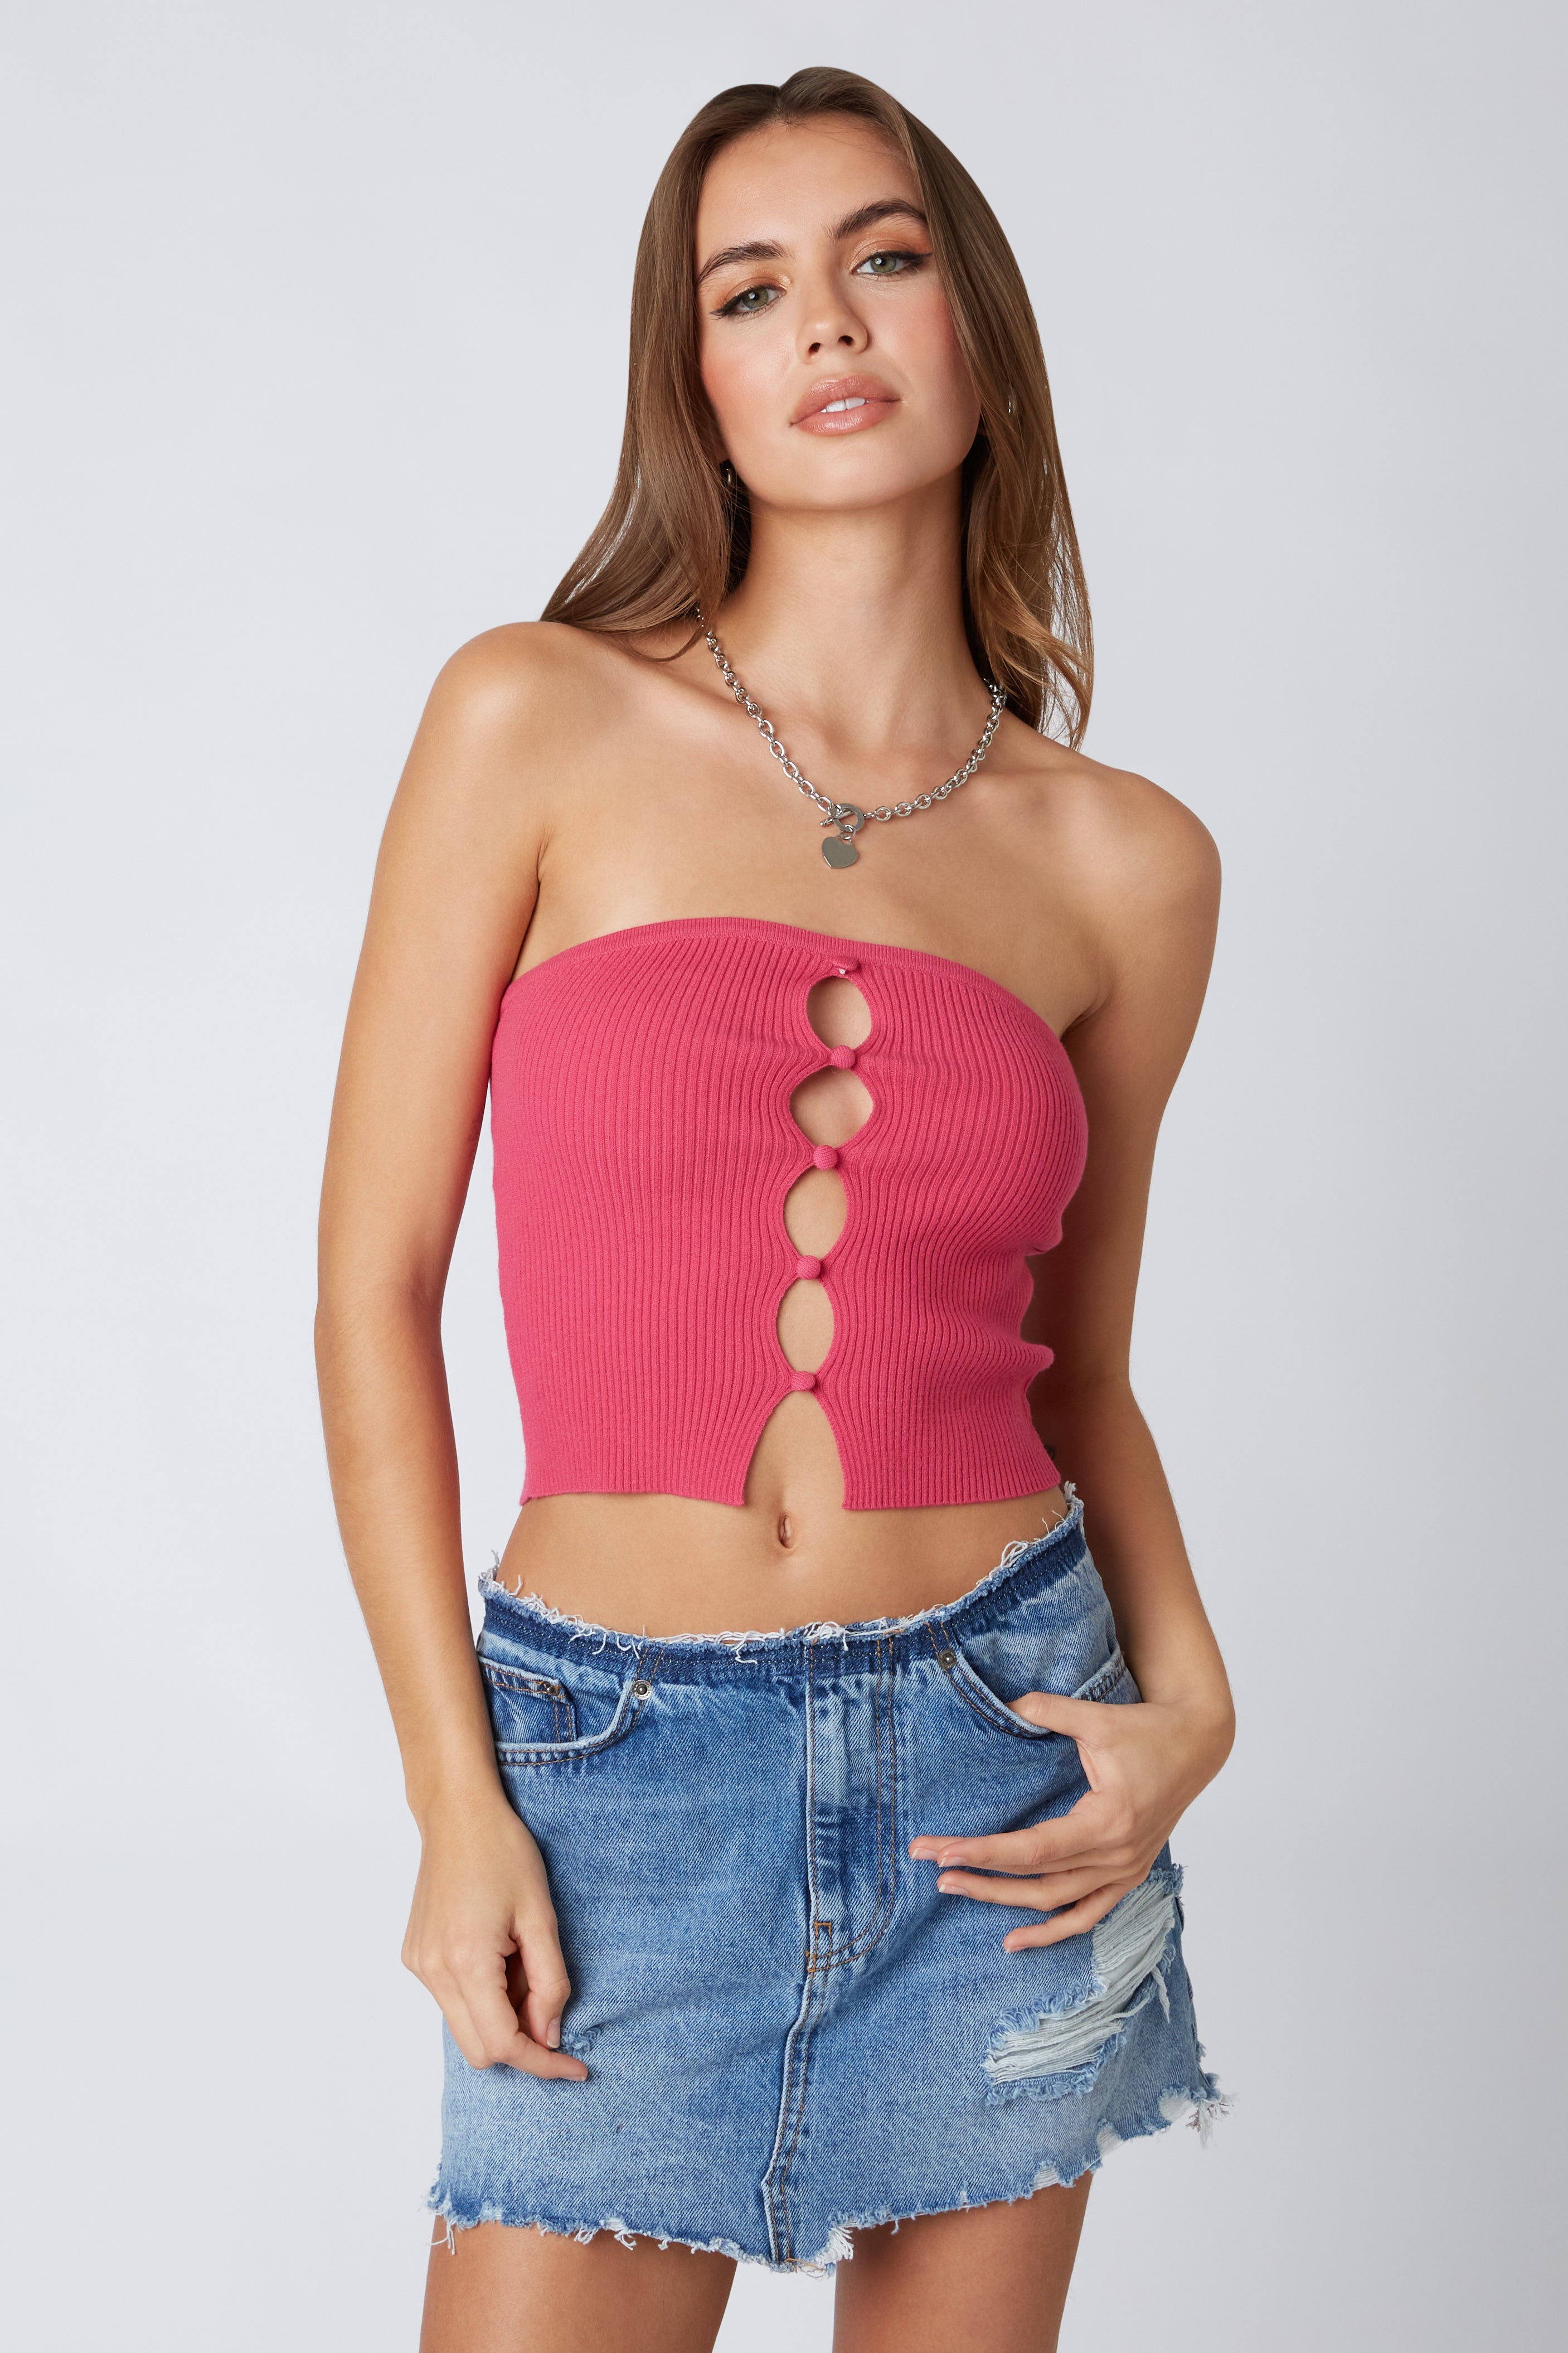 Keyhole Knit Tube Top in Hot Pink Front